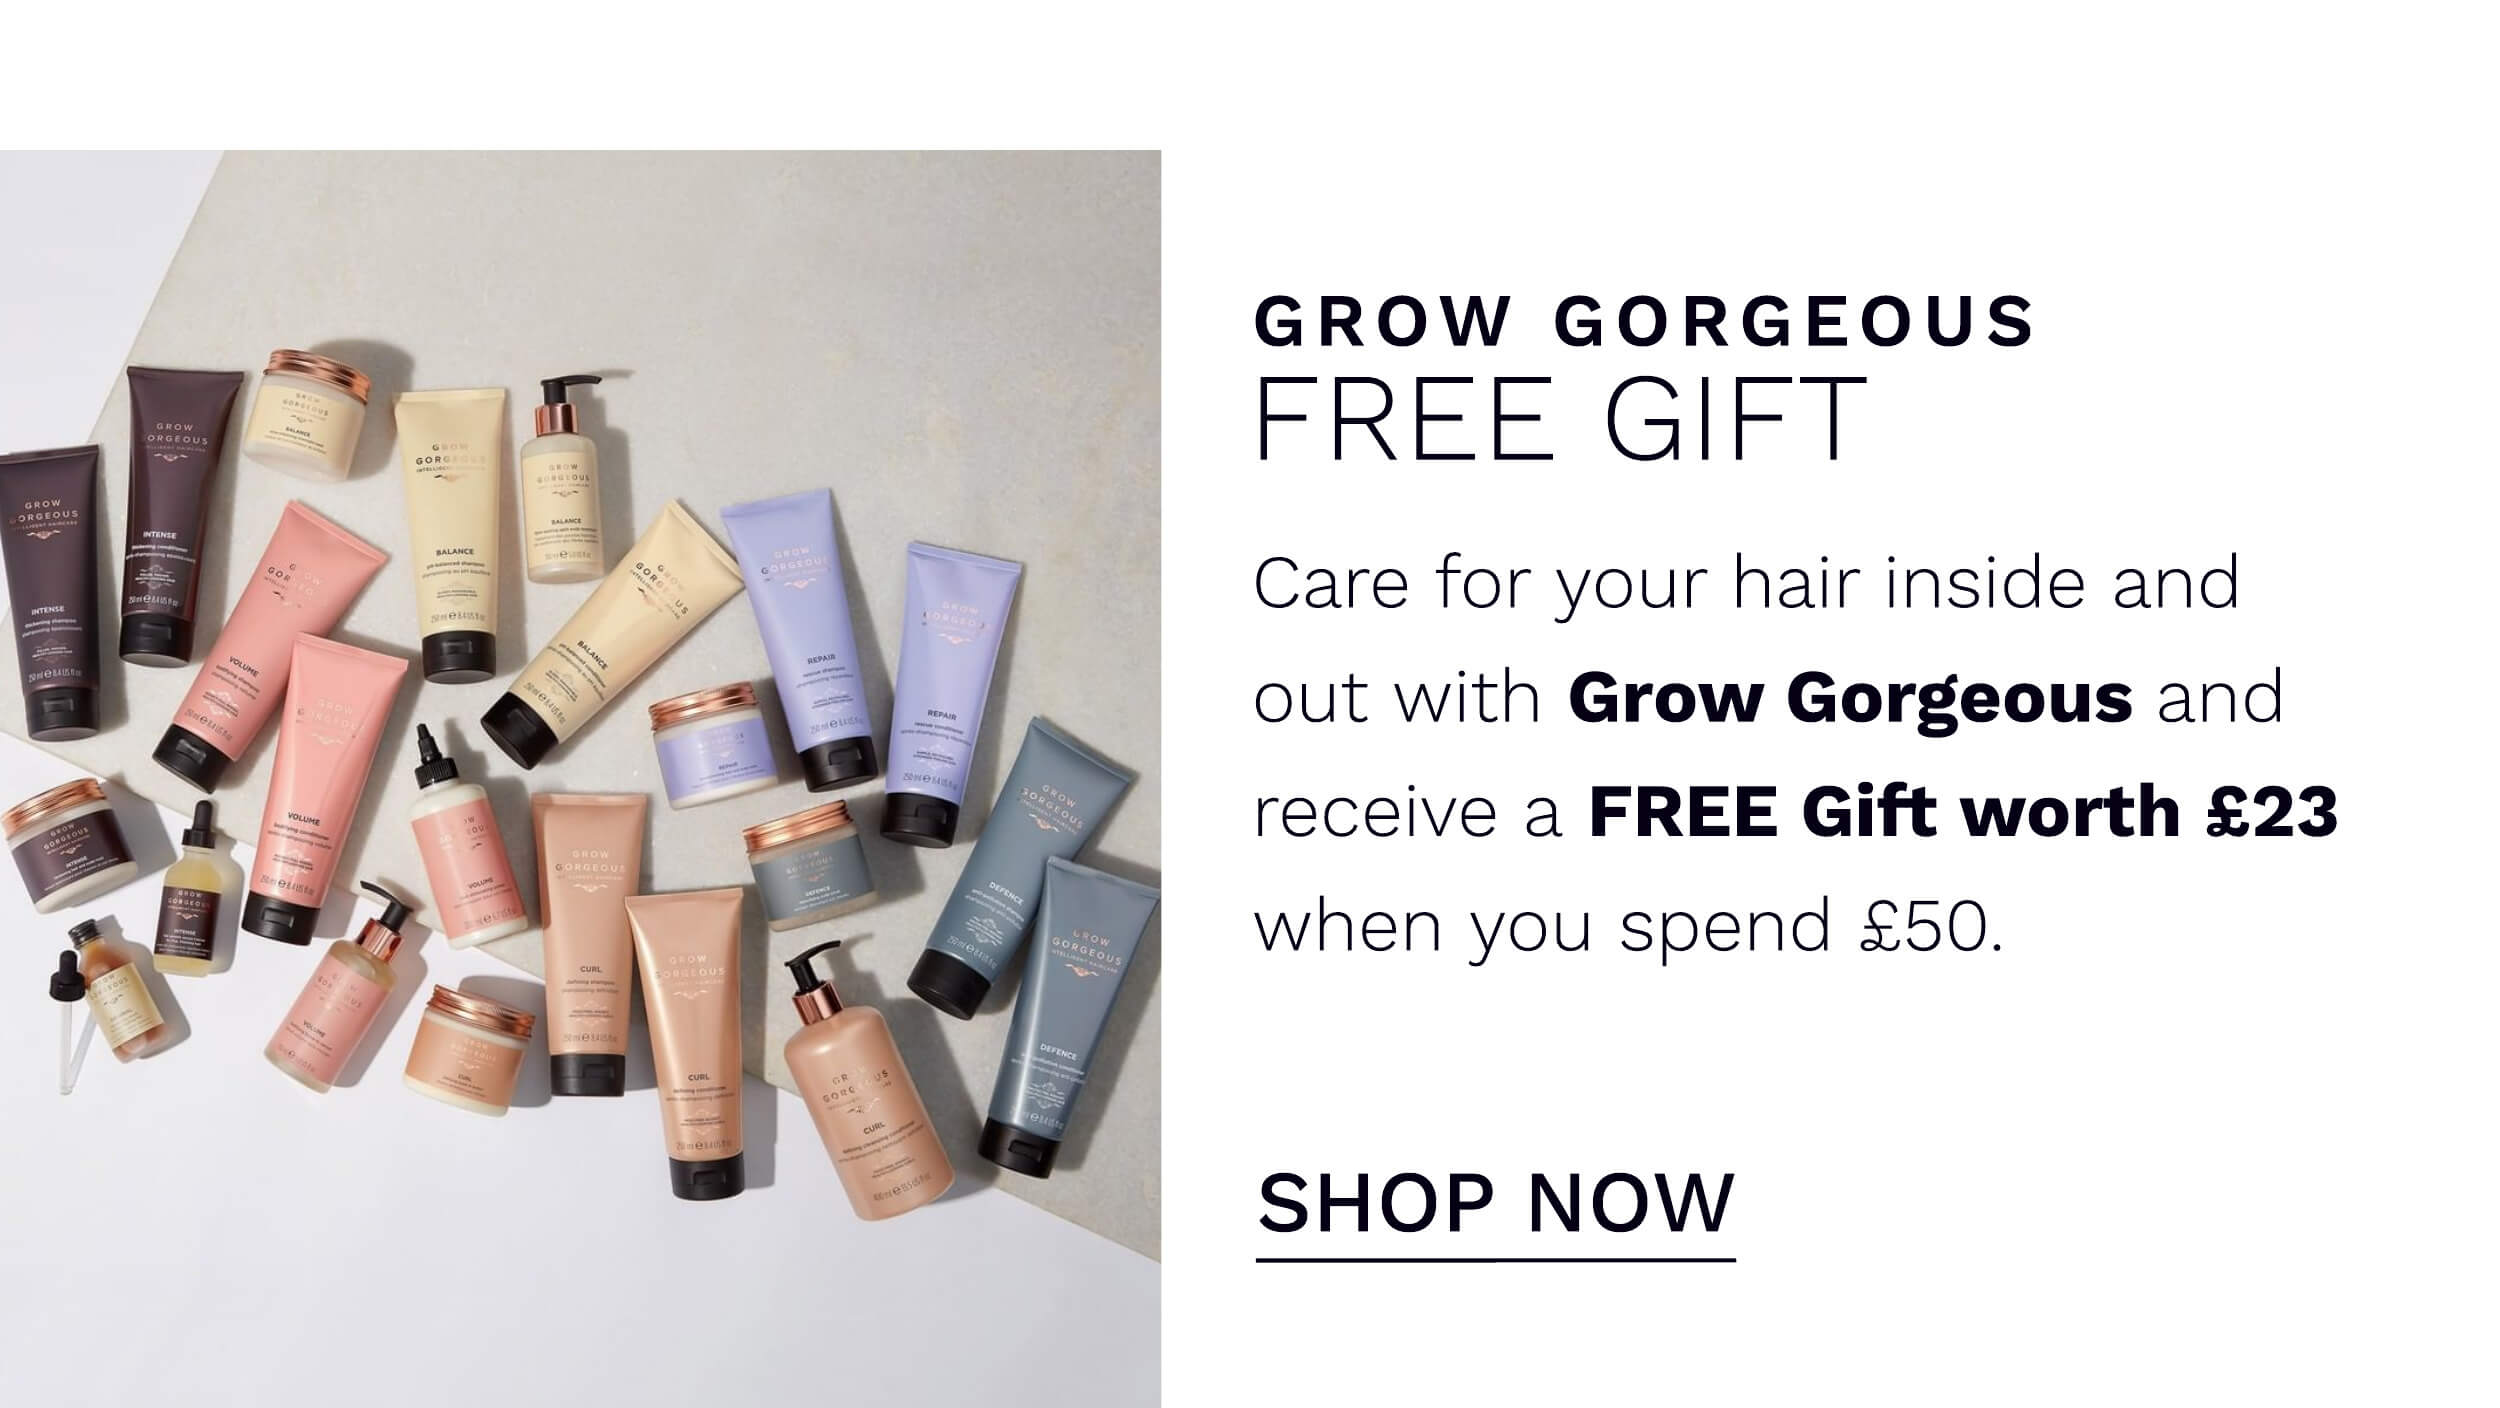 FREE GIFT WITH GROW GORGEOUS